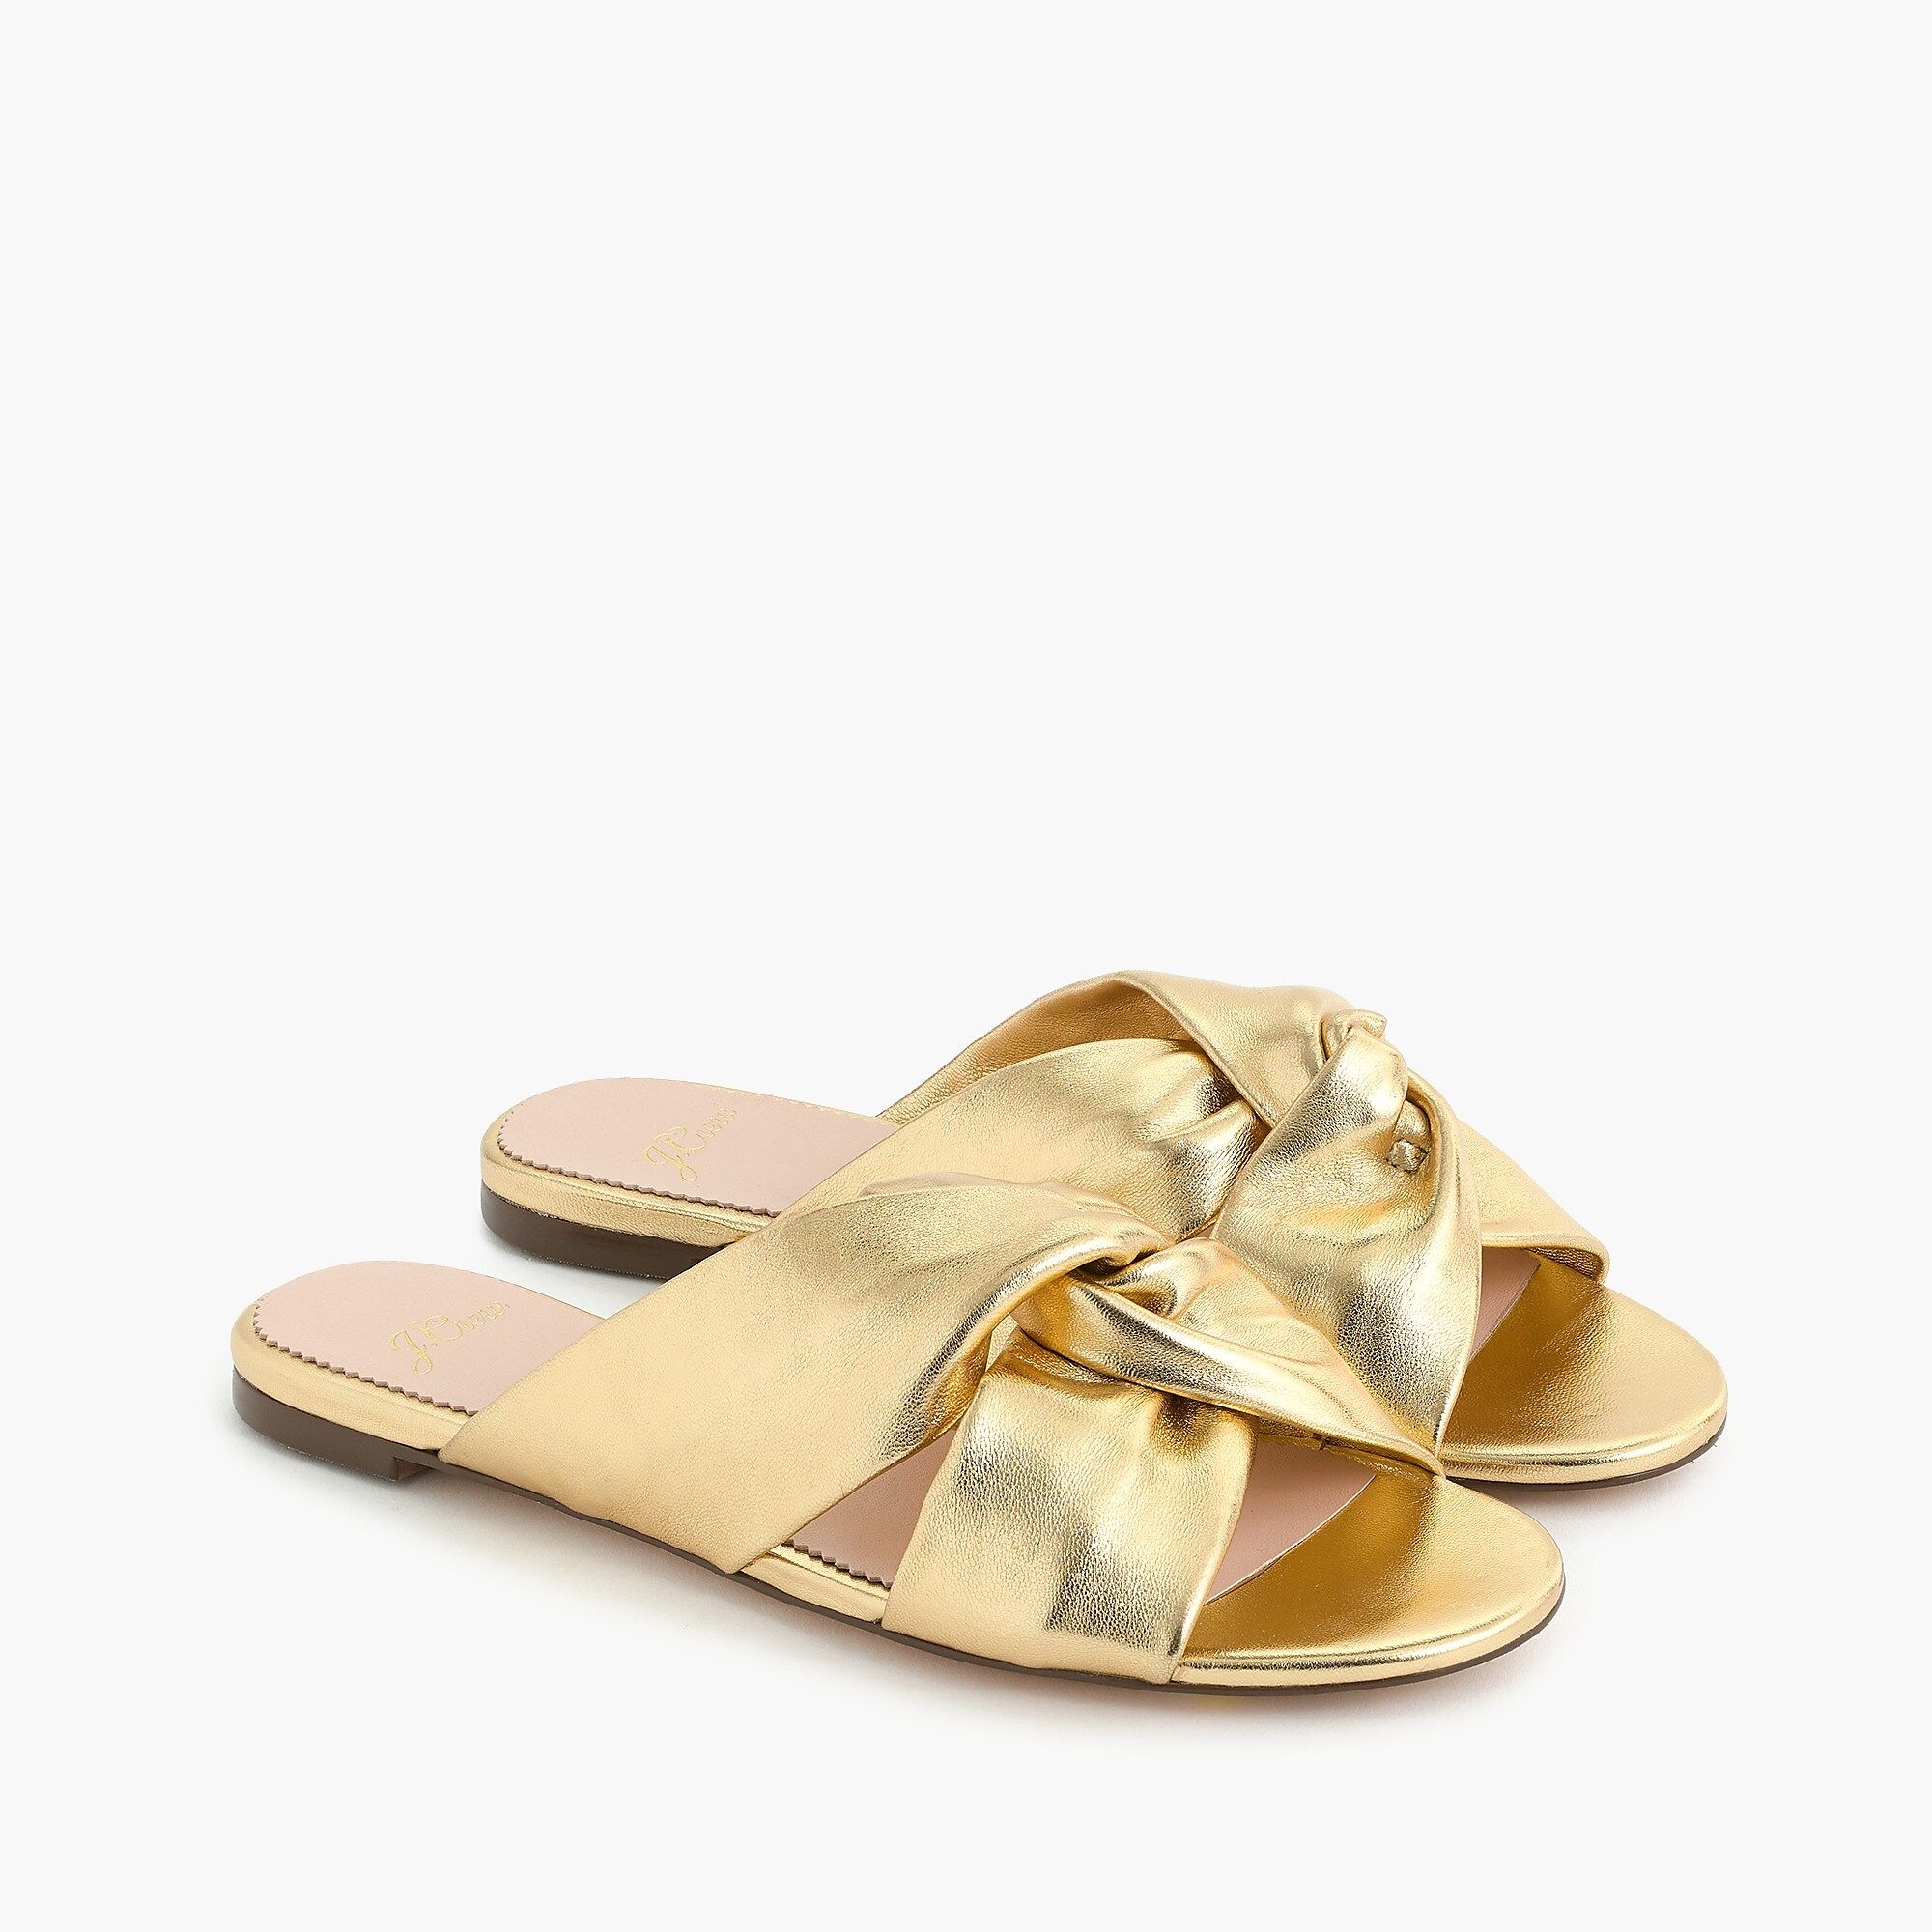 Twisted-knot sandals in metallic leather | J.Crew US